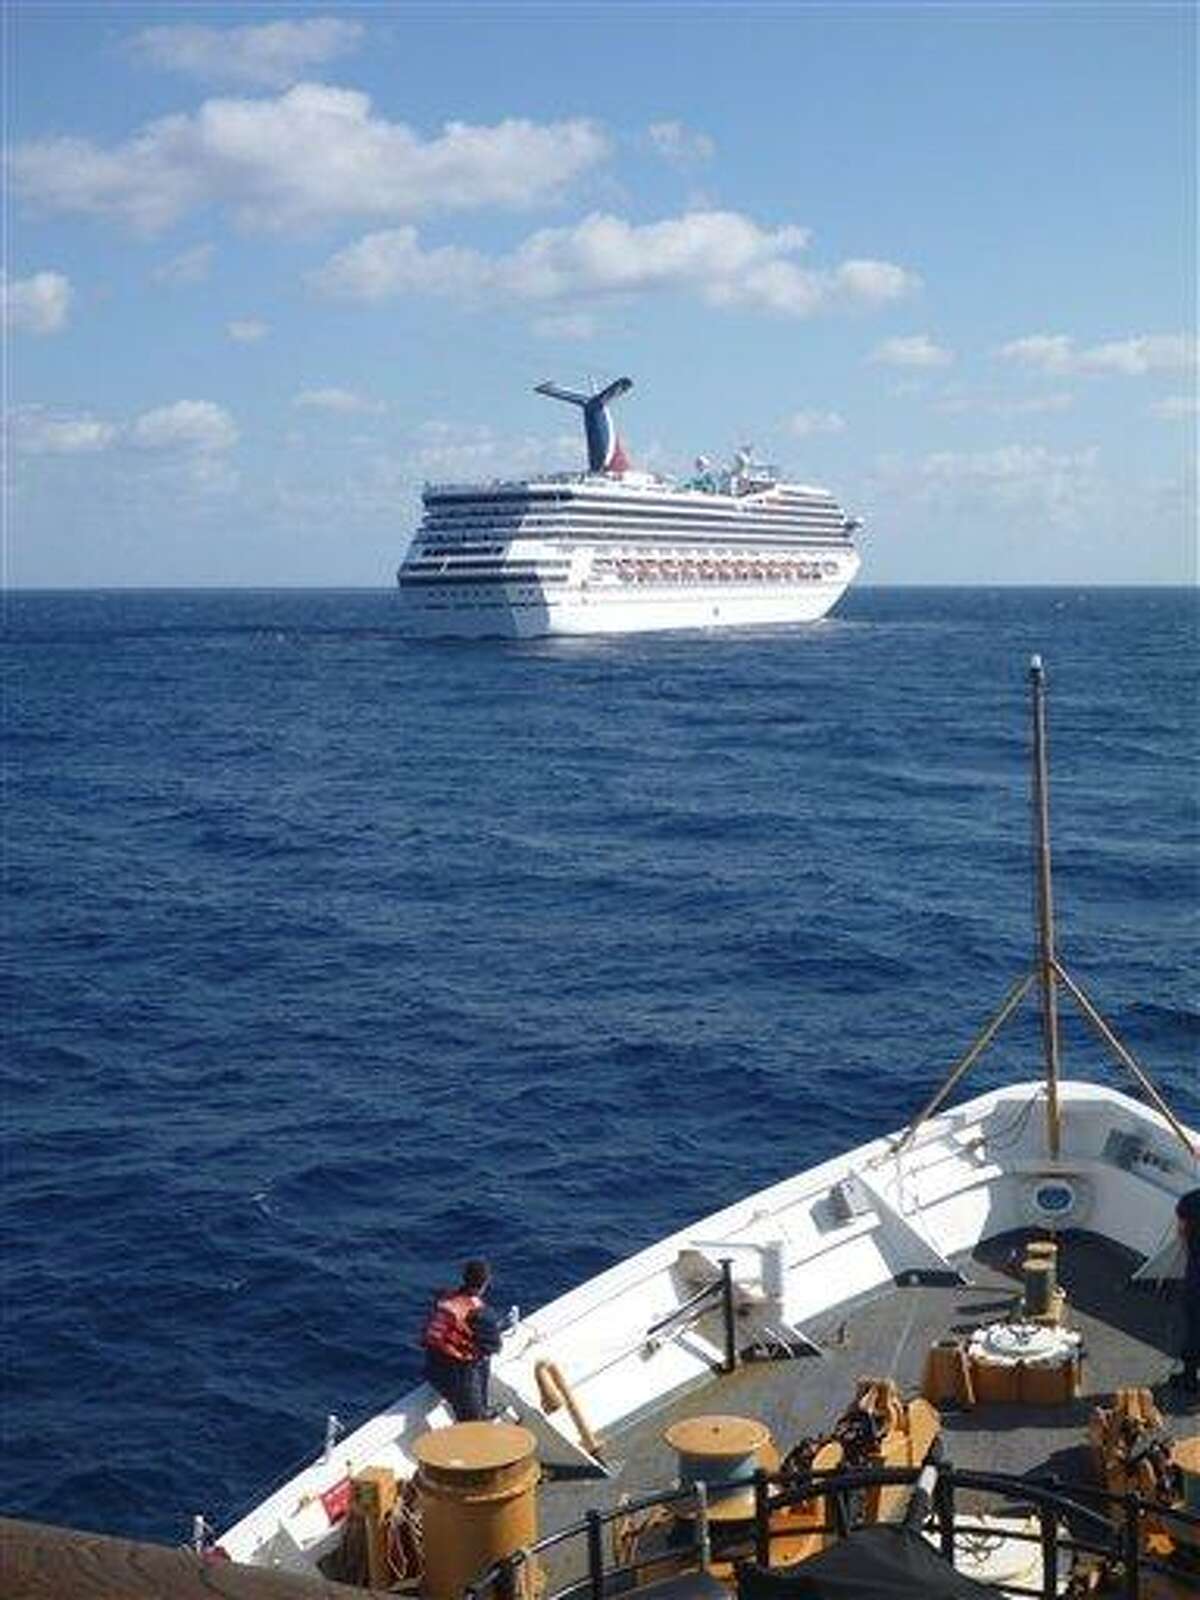 In this image released by the U.S. Coast Guard on Feb. 11, 2013, the Coast Guard Cutter Vigorous patrols near the cruise ship Carnival Triumph in the Gulf of Mexico, Feb. 11, 2013. The Carnival Triumph has been floating aimlessly about 150 miles off the Yucatan Peninsula since a fire erupted in the aft engine room early Sunday, knocking out the ship's propulsion system. No one was injured and the fire was extinguished. AP Photo/U.S. Coast Guard- Lt. Cmdr. Paul McConnell